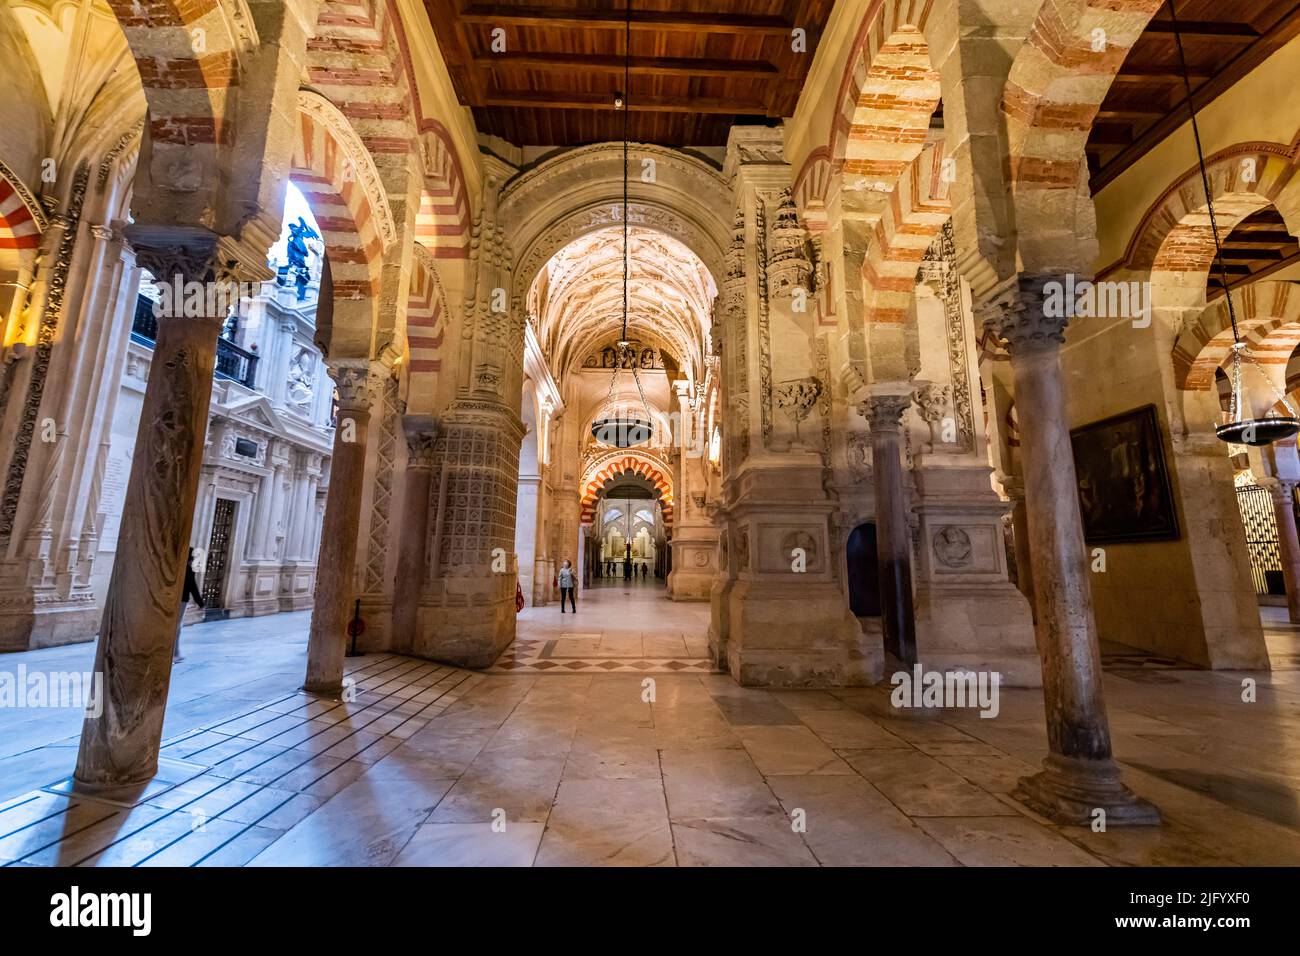 Columns and double-tiered arches, Great Mosque (Mezquita) and Cathedral of Cordoba, UNESCO World Heritage Site, Cordoba, Andalusia, Spain, Europe Stock Photo